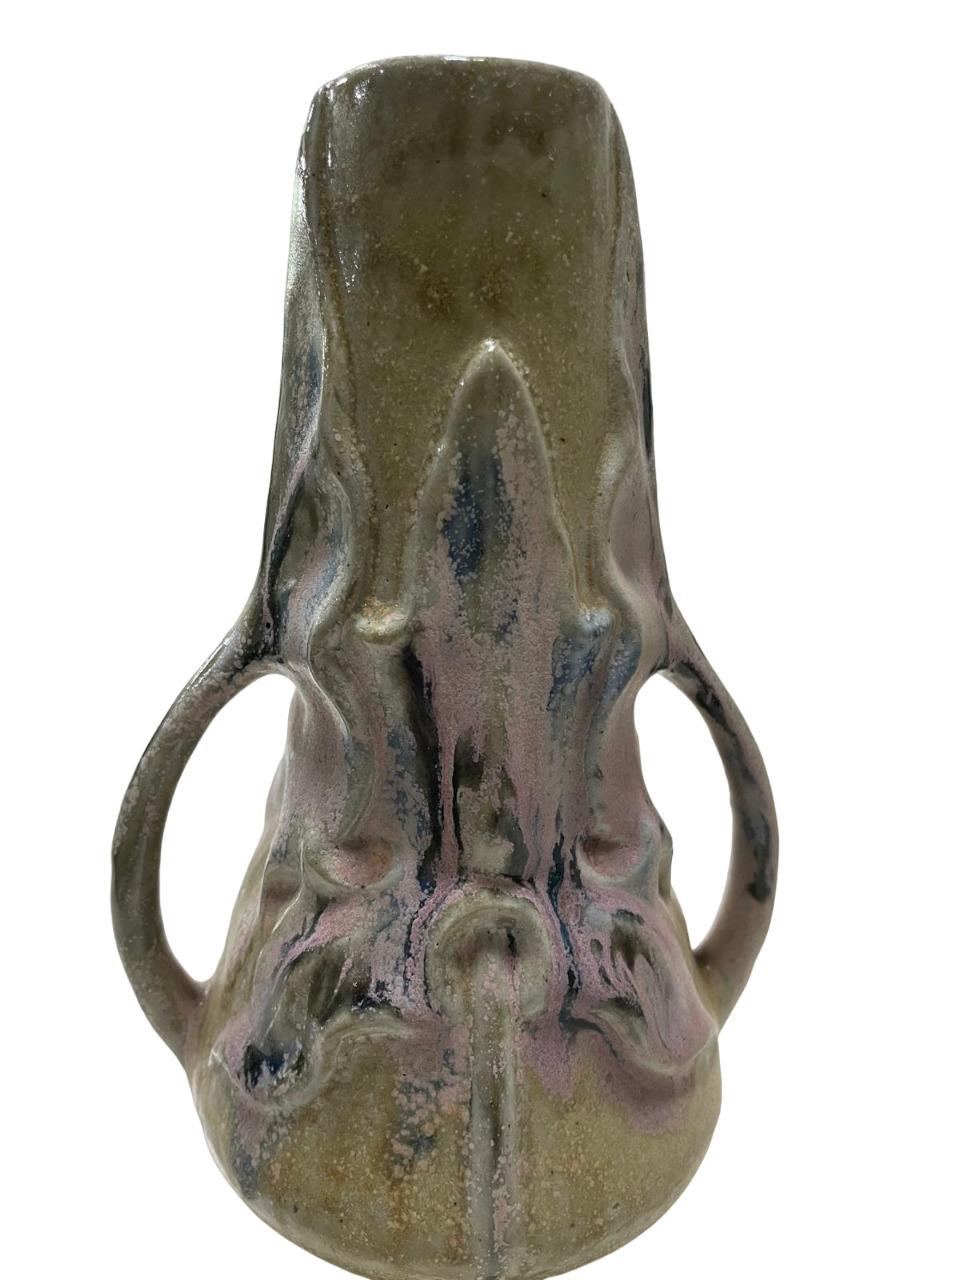 ART NOUVEAU two-handled GREBER Vase, with some pink flashes, refined ceramic For Sale 9